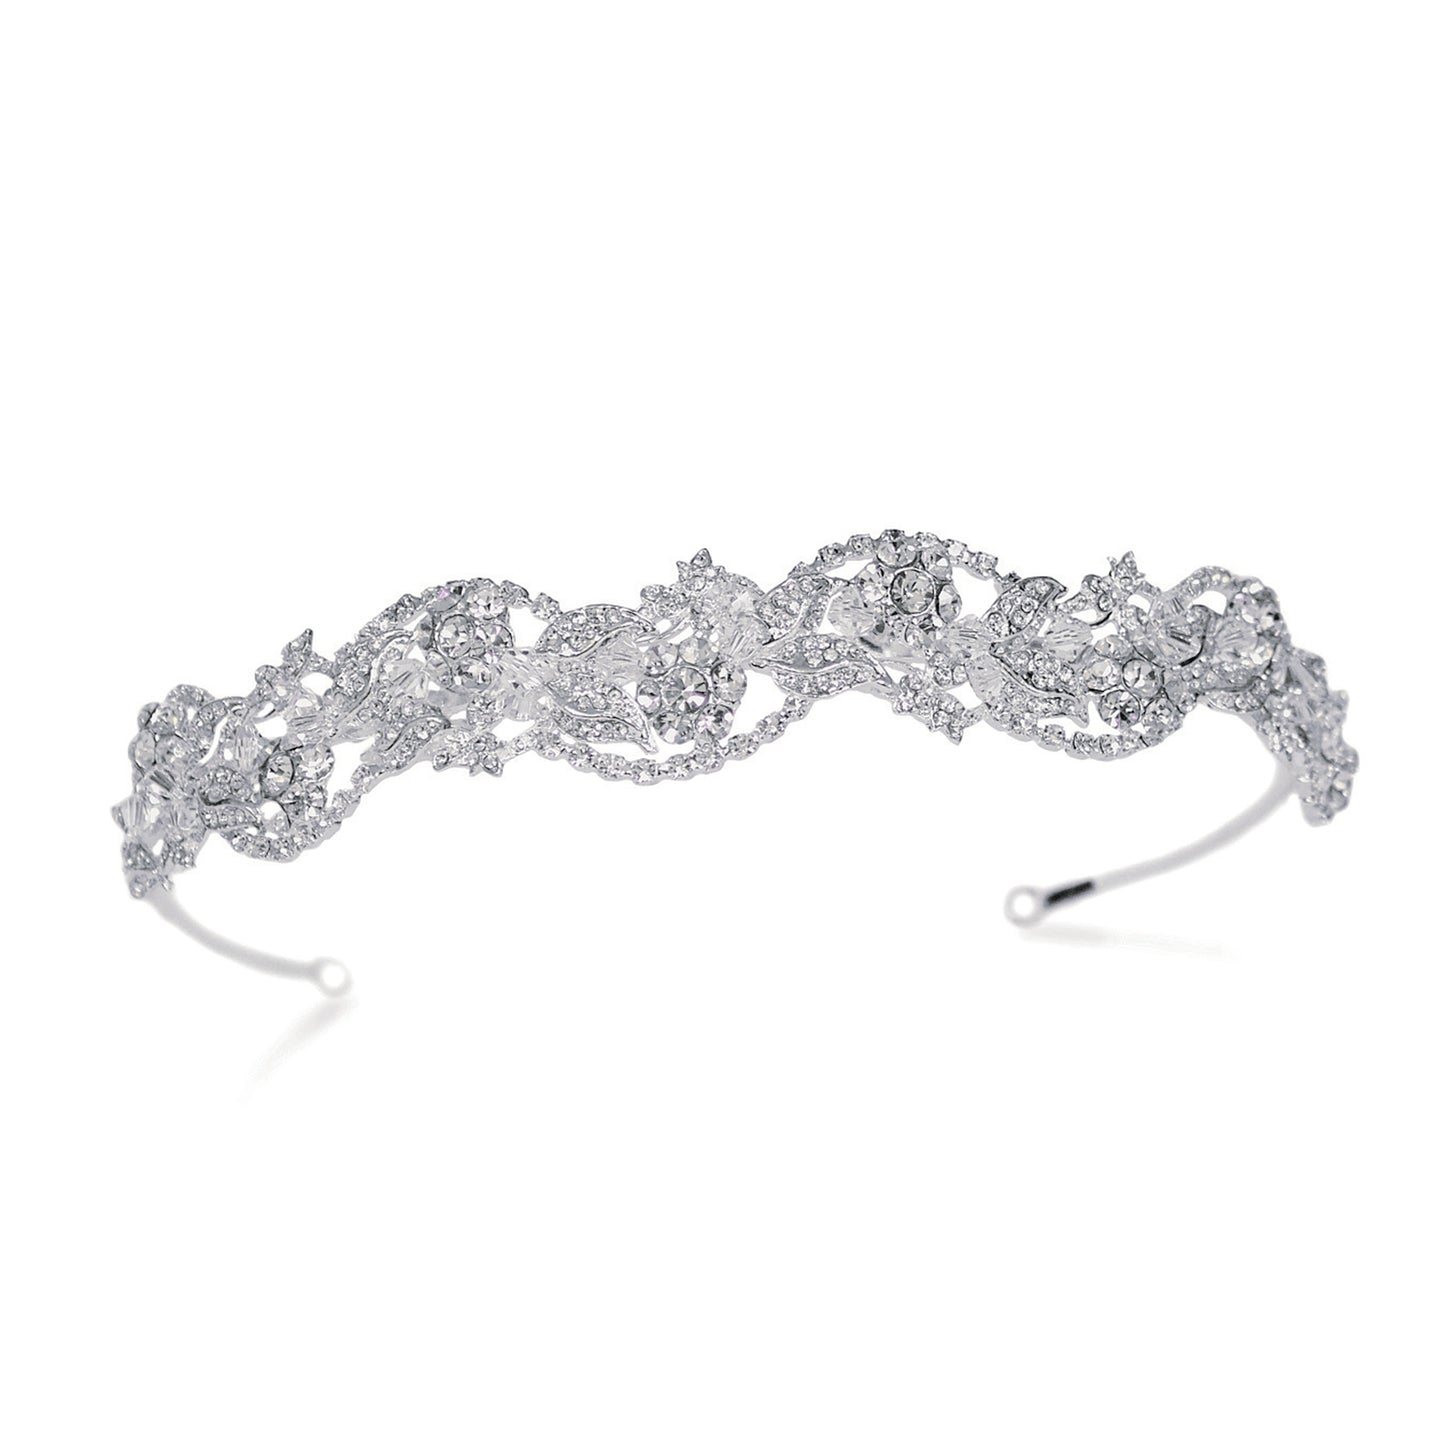 Bria - Silver Crystal Entwined Floral Band